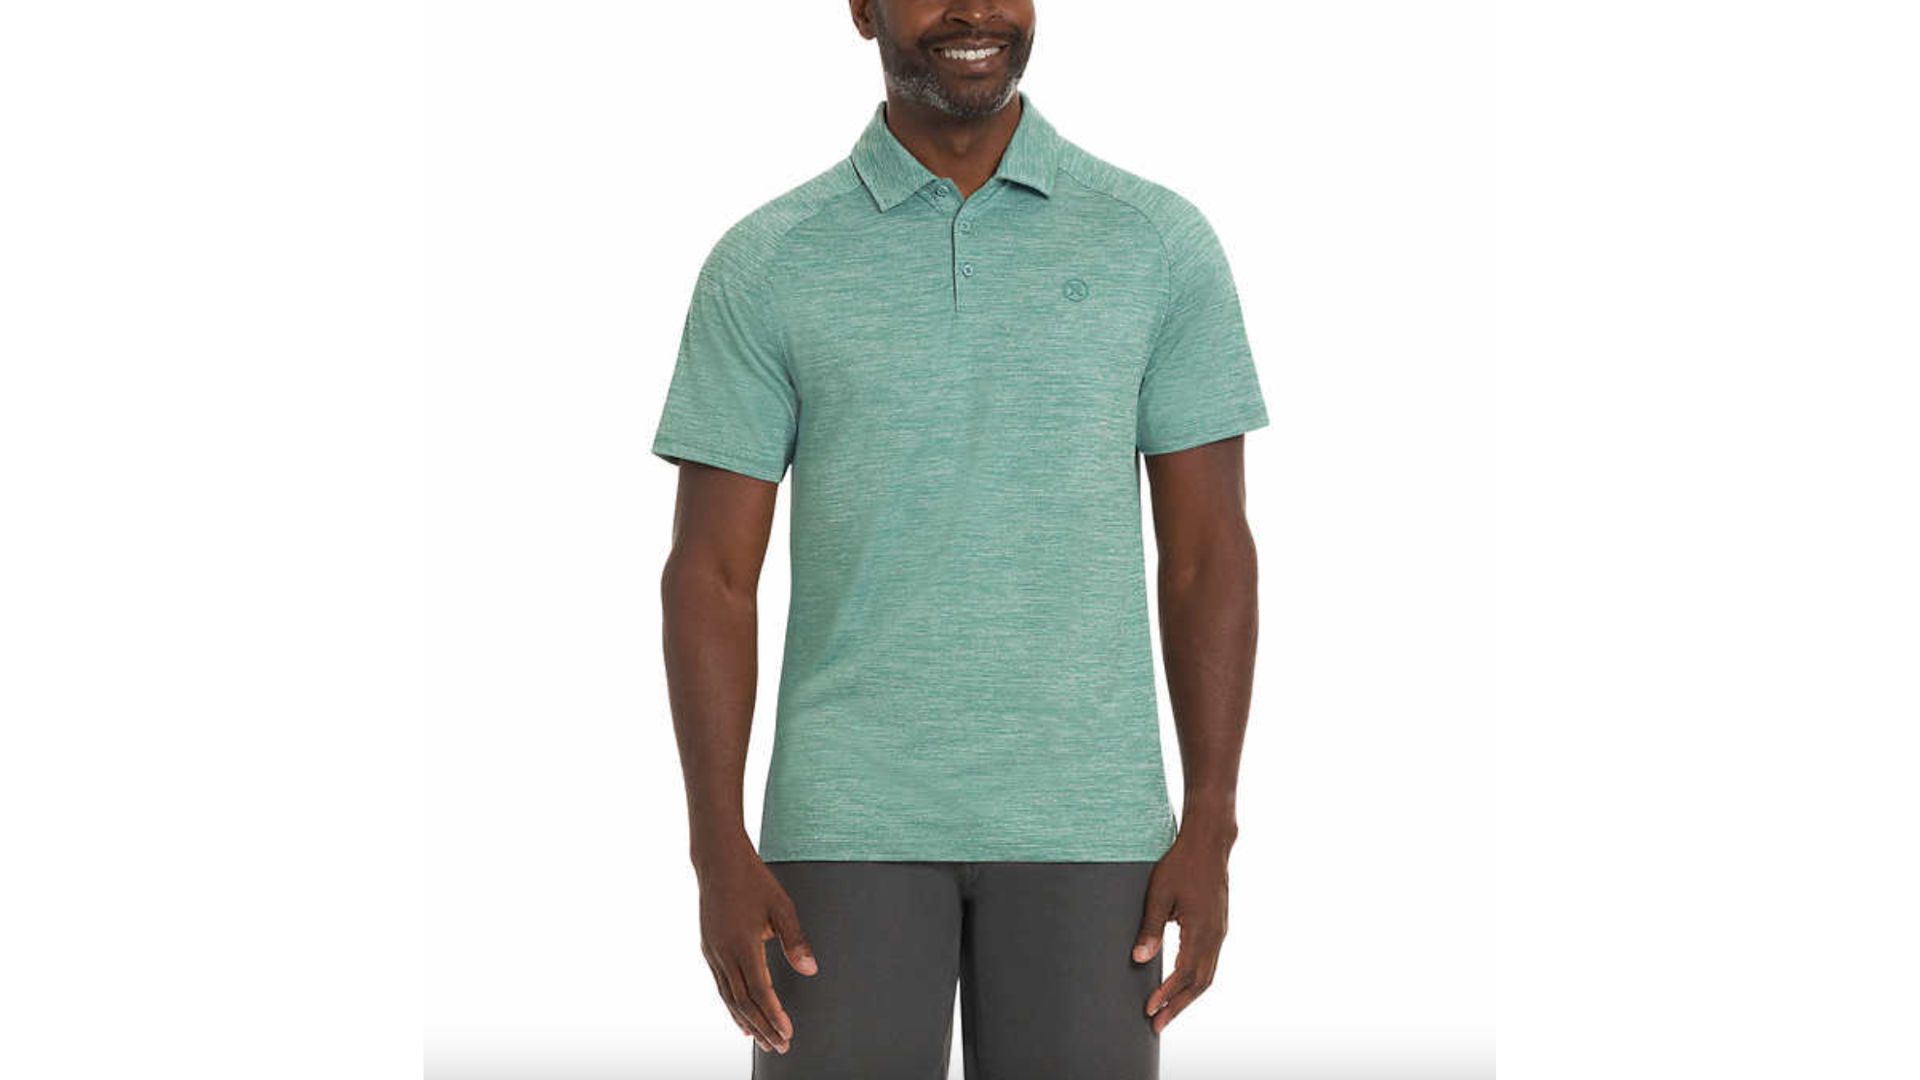 <ul> <li><strong>Price:</strong> <a href="https://www.costco.com/hurley-men's-performance-polo.product.4000192791.html" rel="noreferrer noopener">$13.99</a></li> </ul> <p>Dress up any ensemble easily with Hurley men's short-sleeve polo. Each polo top features a three-button placket and is made of stretch fabric for extra comfort. </p> <p>Costco members get $2 off the original $15.99 online price. Pick from a variety of colors, like green, gray, blue and black, and choose the right size from a wide selection of men's options.</p> <p><strong>Trending Now: <a href="https://www.gobankingrates.com/saving-money/food/costco-superfan-highest-quality-kirkland-food-items/?utm_term=related_link_5&utm_campaign=1263709&utm_source=msn.com&utm_content=7&utm_medium=rss" rel="">I'm a Costco Superfan: These Are the 5 Highest-Quality Kirkland Food Items</a></strong></p>